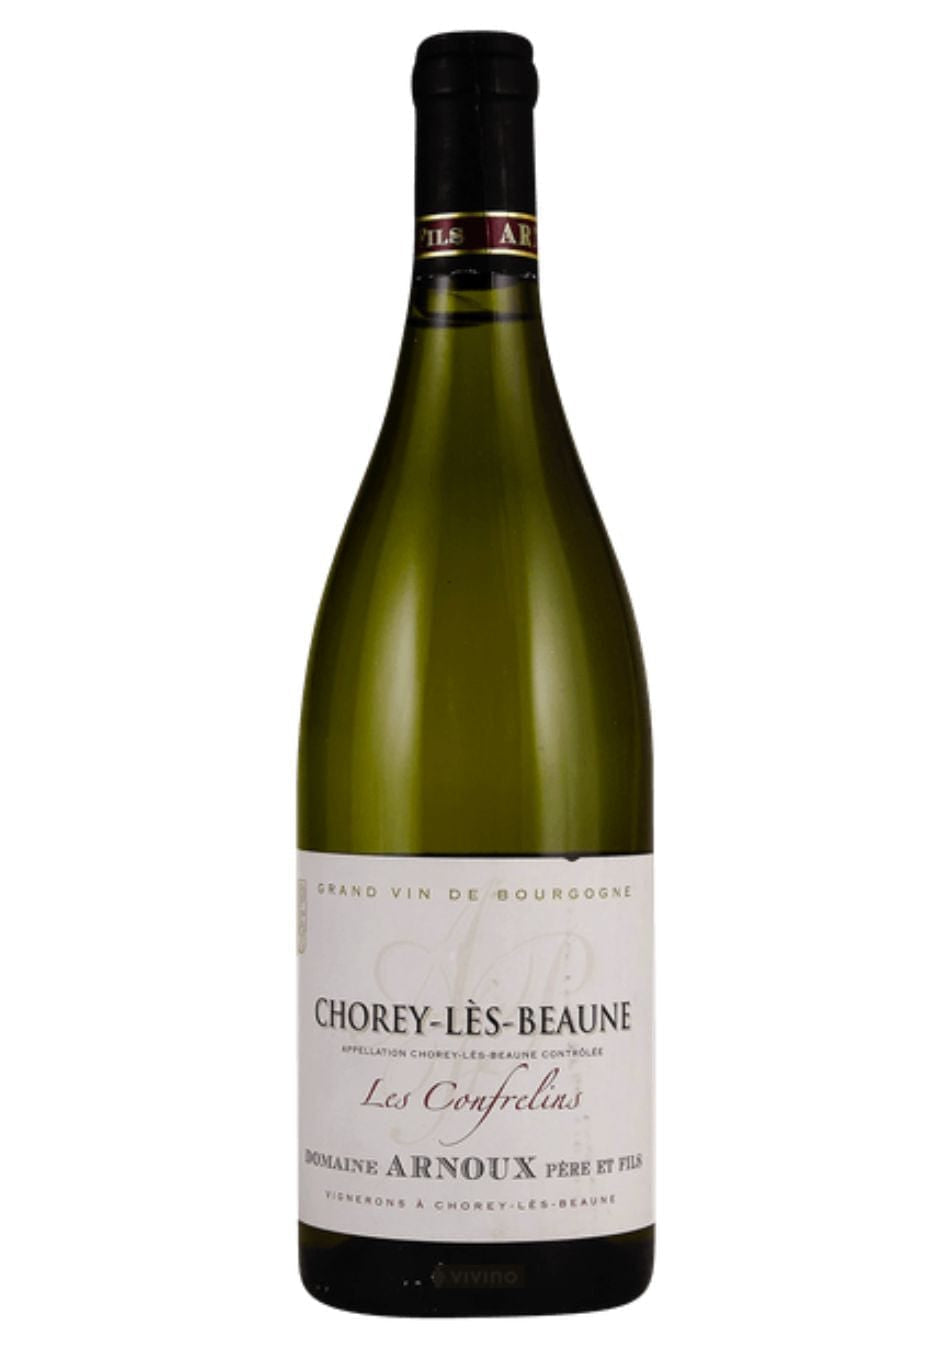 Shop Domaine Armoux Domaine Arnoux Chorey-les-beaune Blanc 2020 online at PENTICTON artisanal French wine store in Hong Kong. Discover other French wines, promotions, workshops and featured offers at pentictonpacific.com 